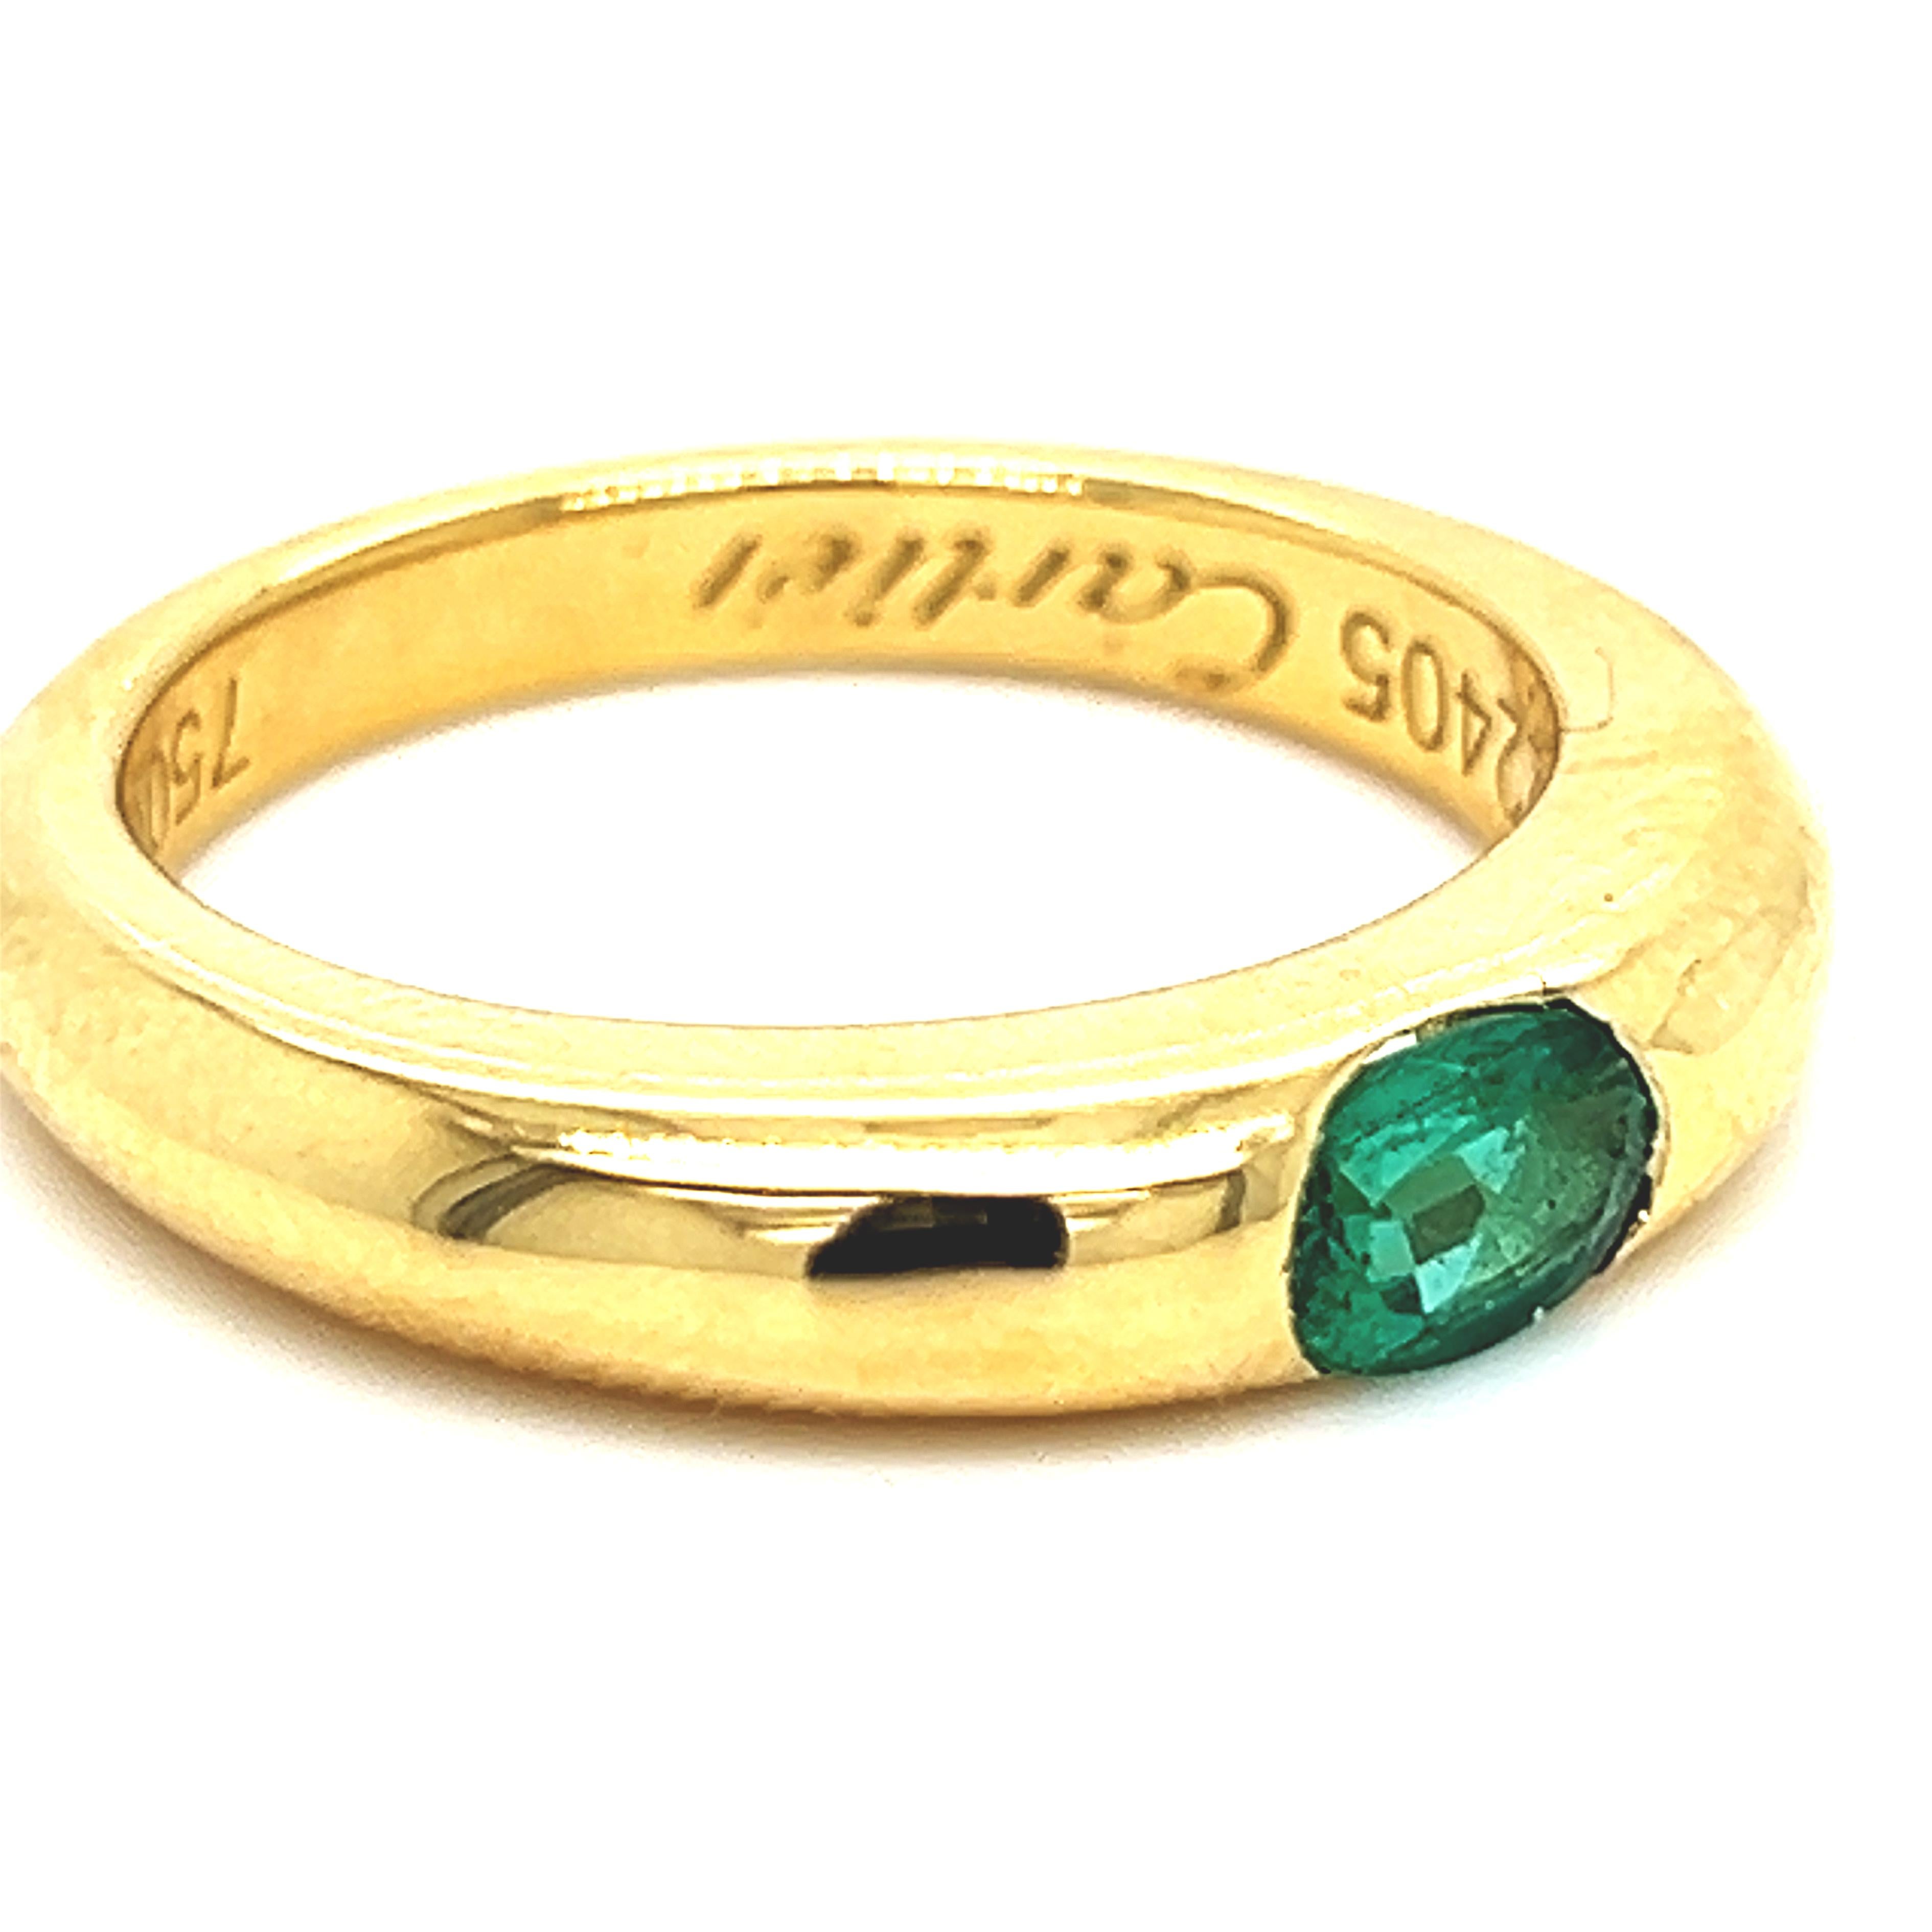 Cartier Original 1992 Oval Emerald 18 Karat Yellow Gold Ellipse Ring In Excellent Condition For Sale In Valenza, IT